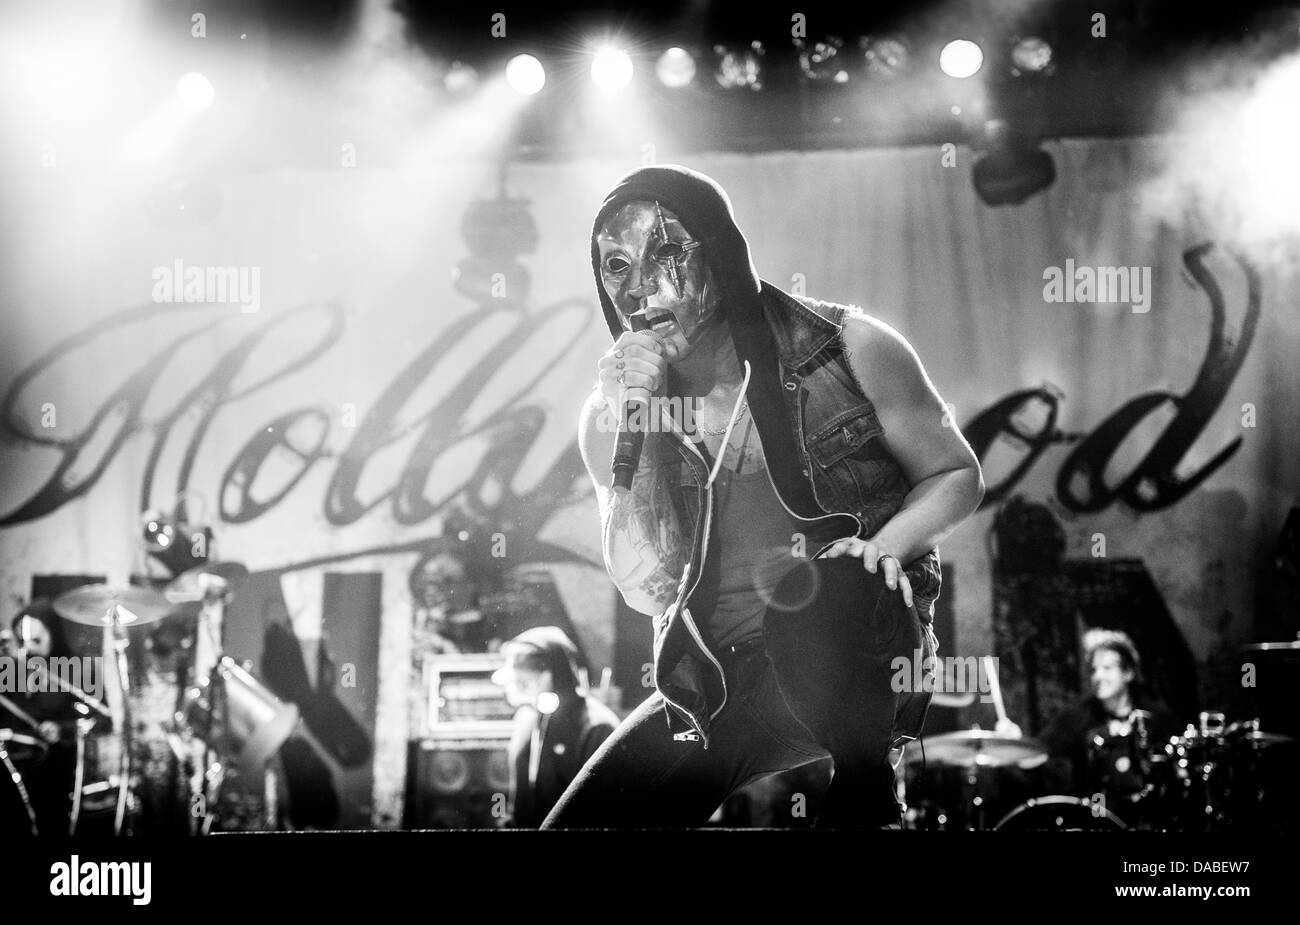 Hollywood Undead performing live Foto Stock